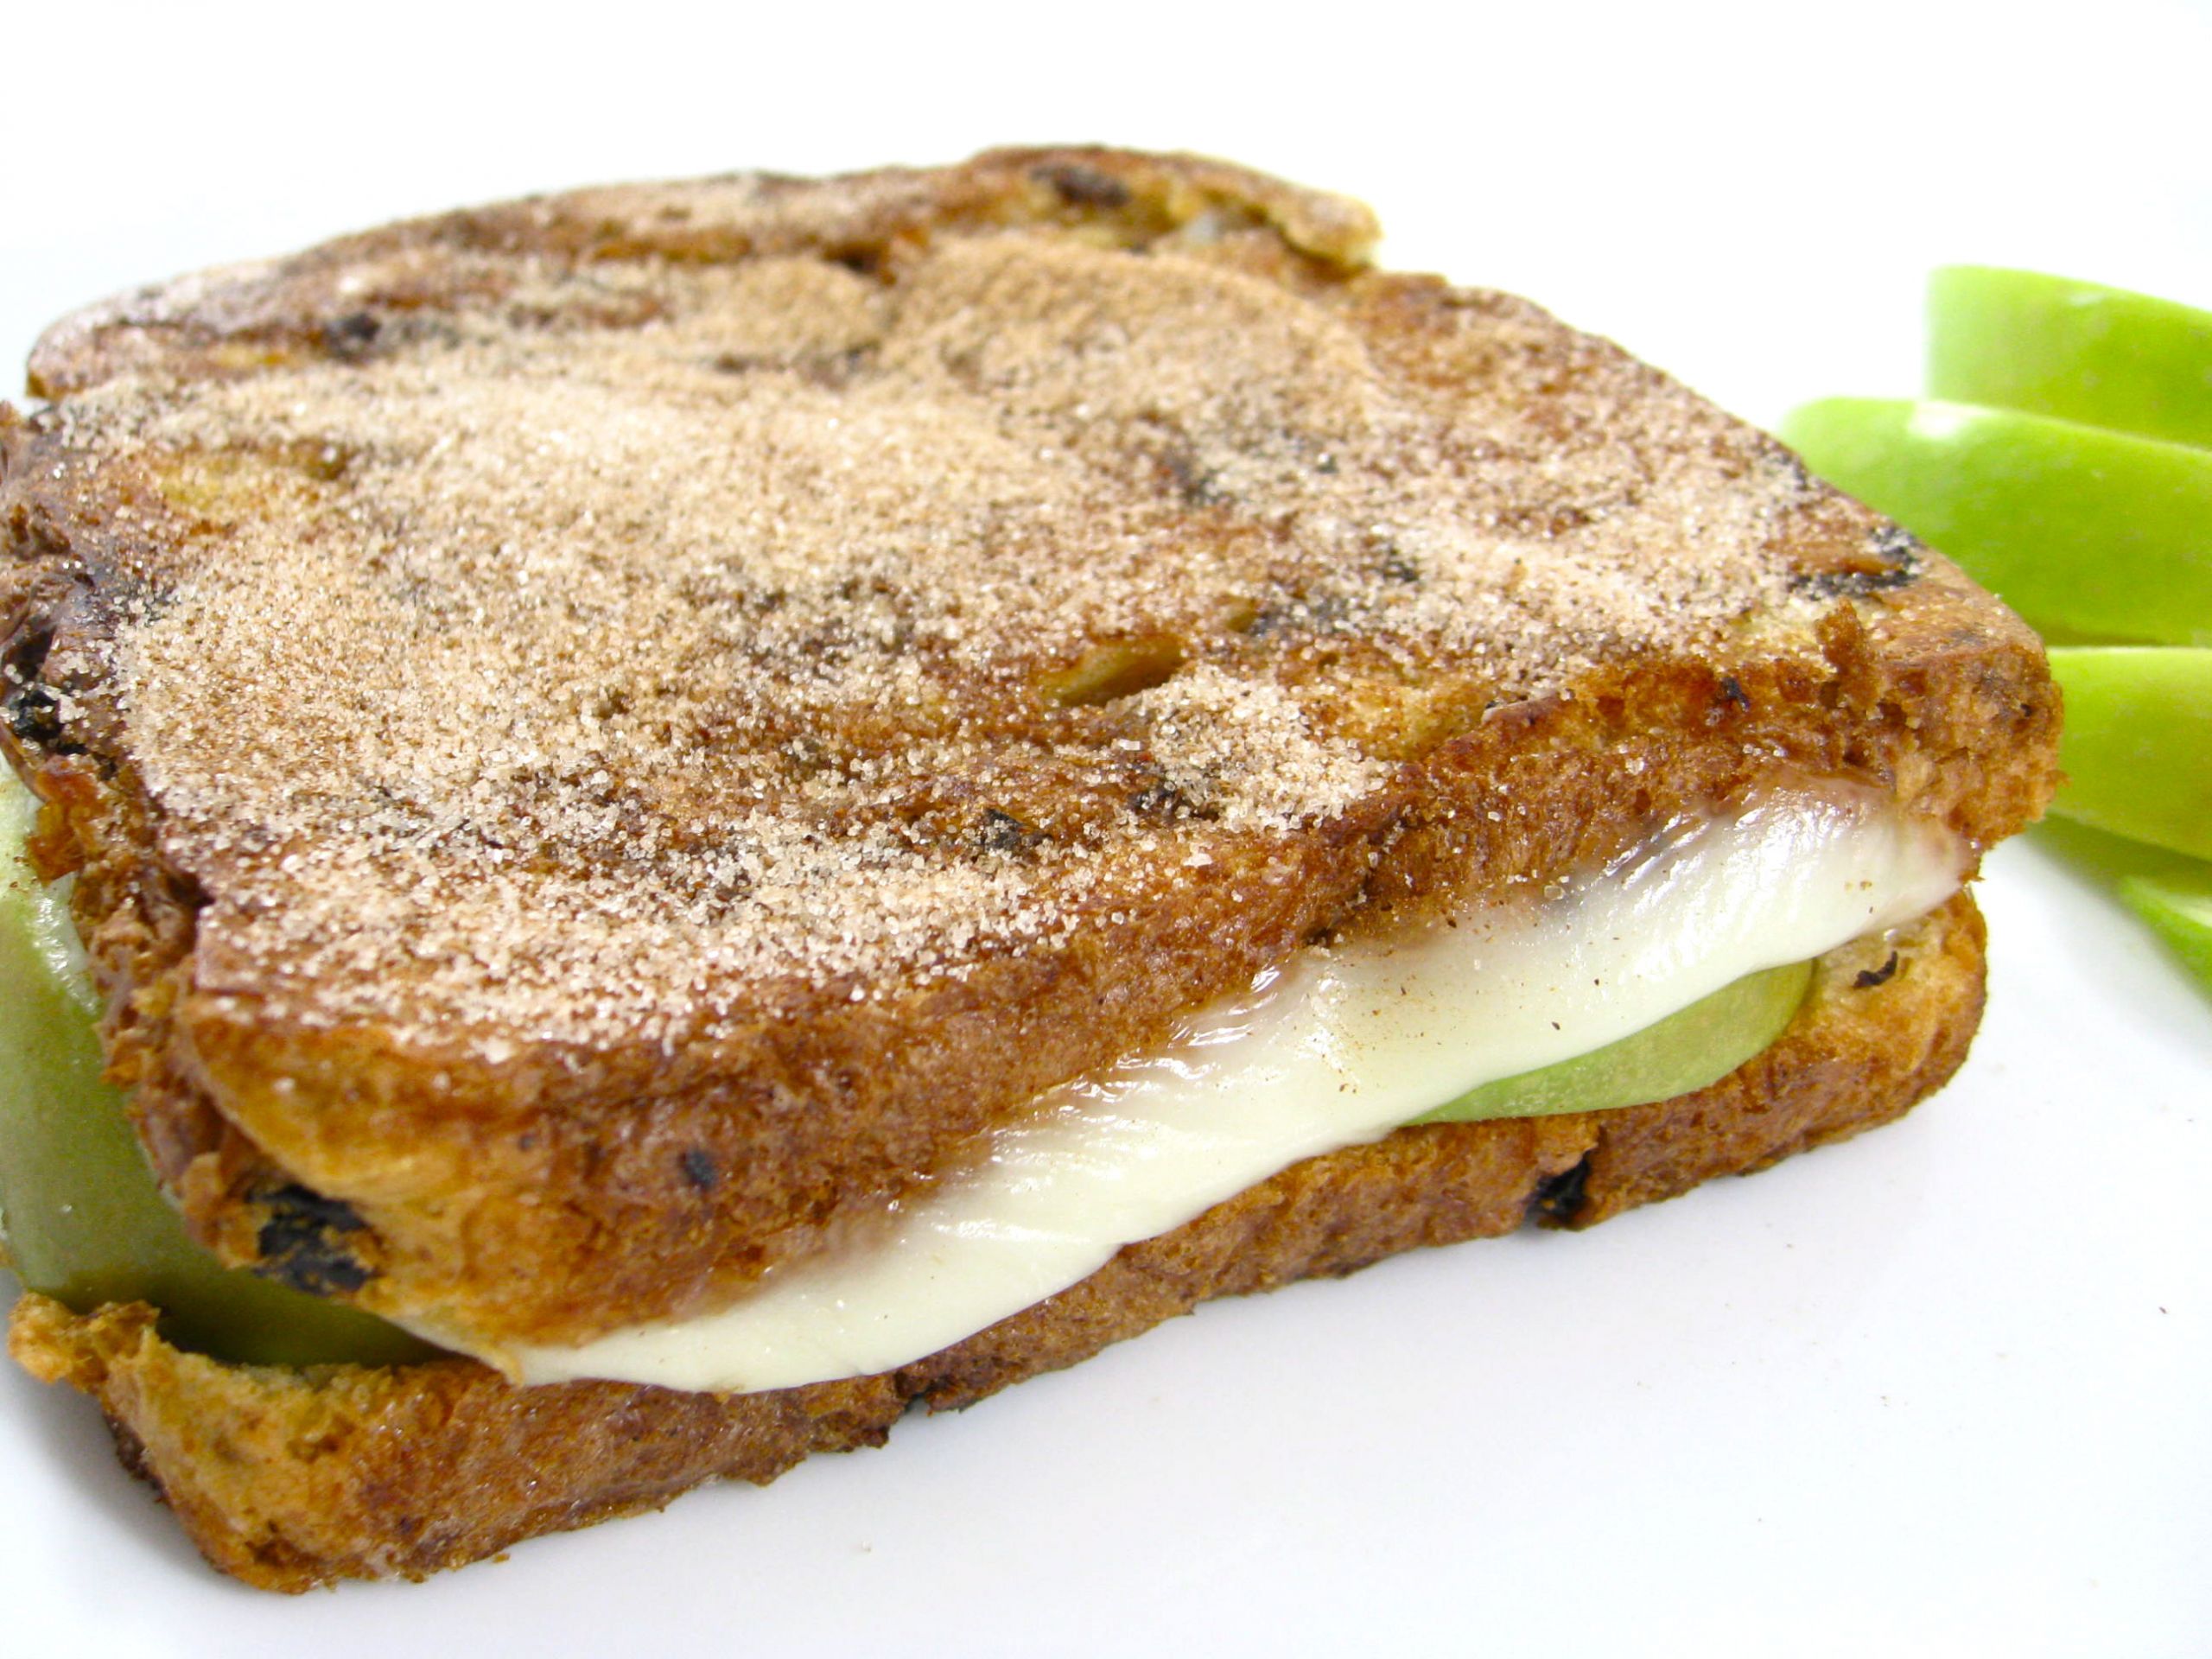 French Toast Sandwich
 A Decadent and Skinny Apple Cheese Stuffed French Toast